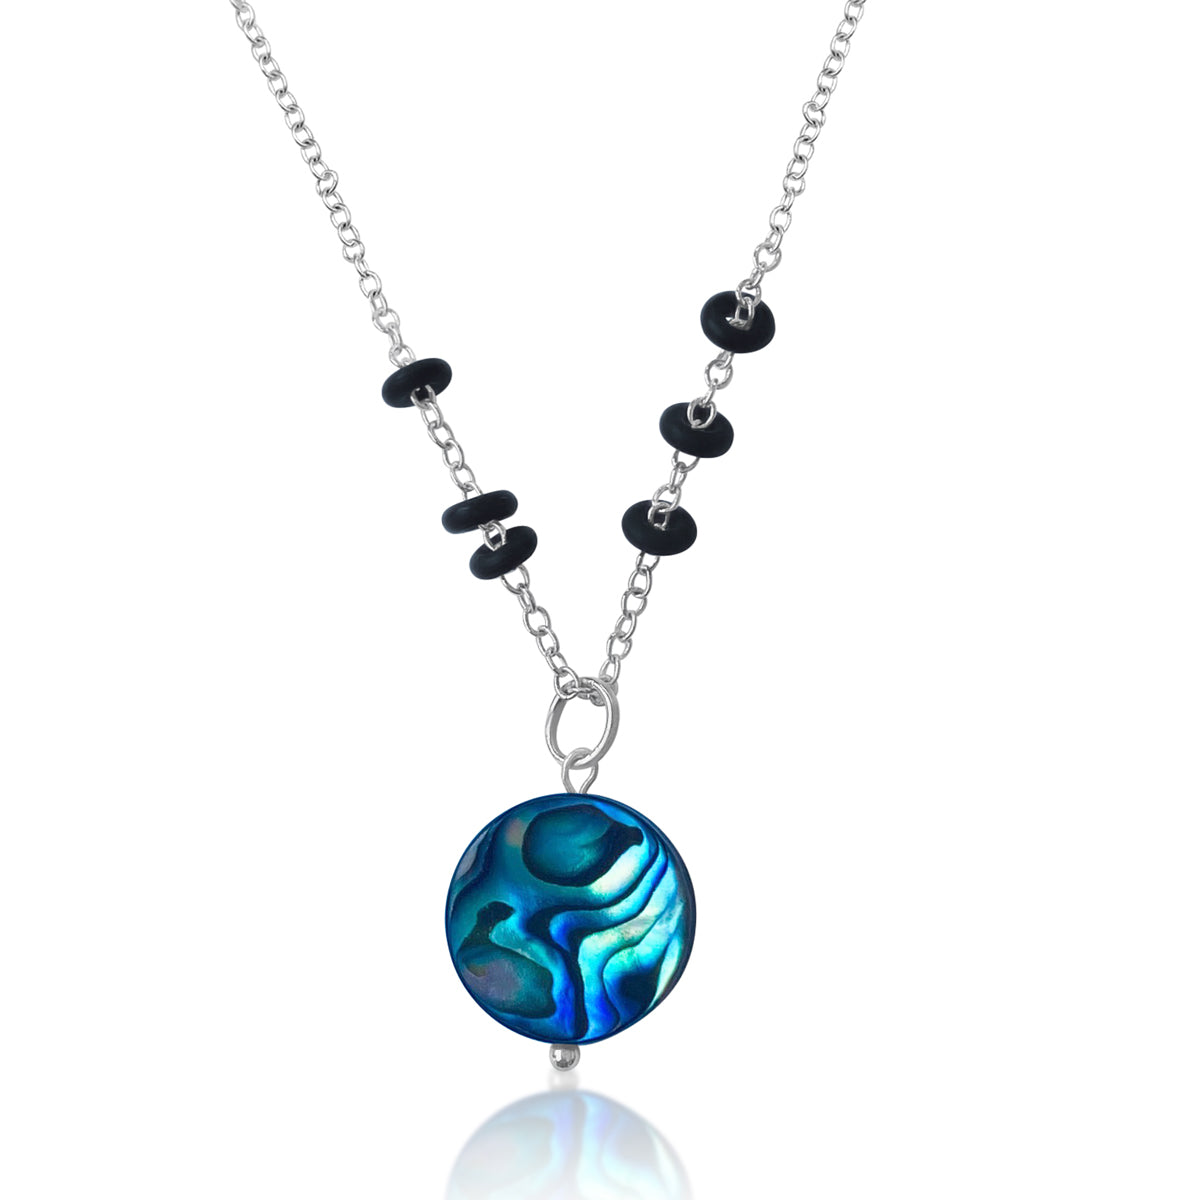 Zero Waste Necklace with up-recycled SCUBA parts and Abalone pendant from the Pacific Ocean.  Eco-conscious jewelry for the ocean lovers, surfers, scuba divers.